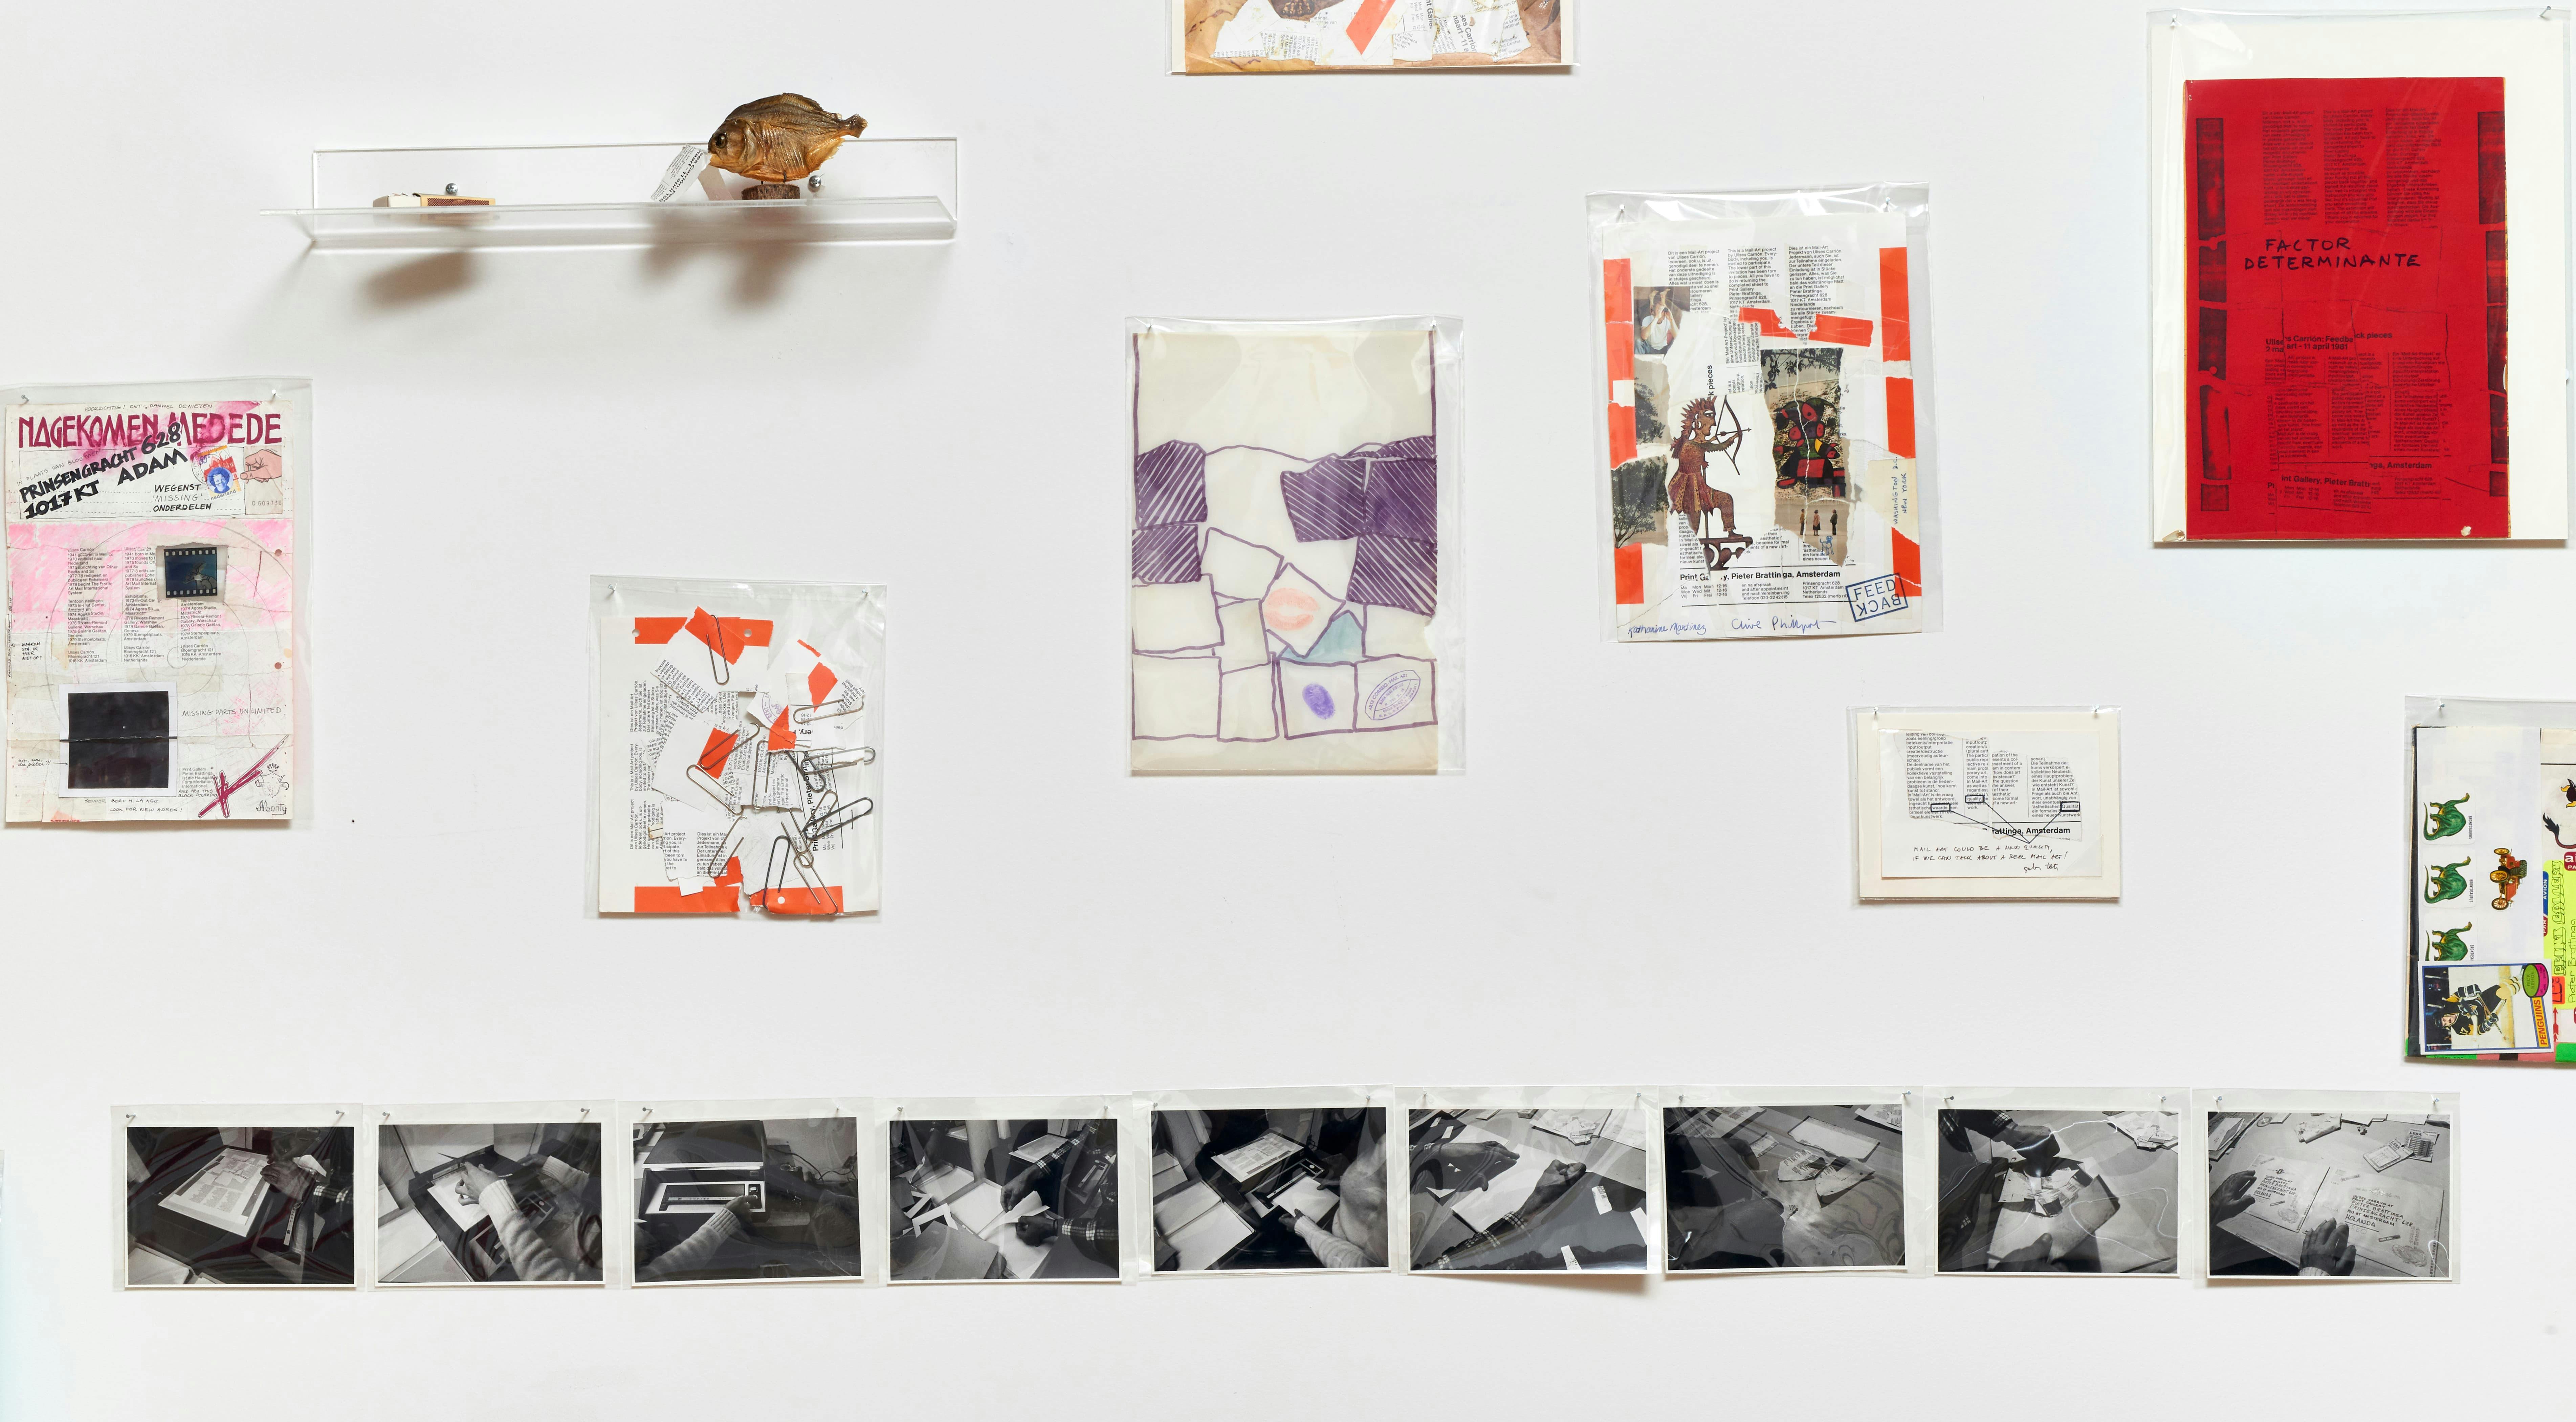 Installation view of Ulises Carrión exhibition showing small collages of varying size and photographs mounted to a white wall.